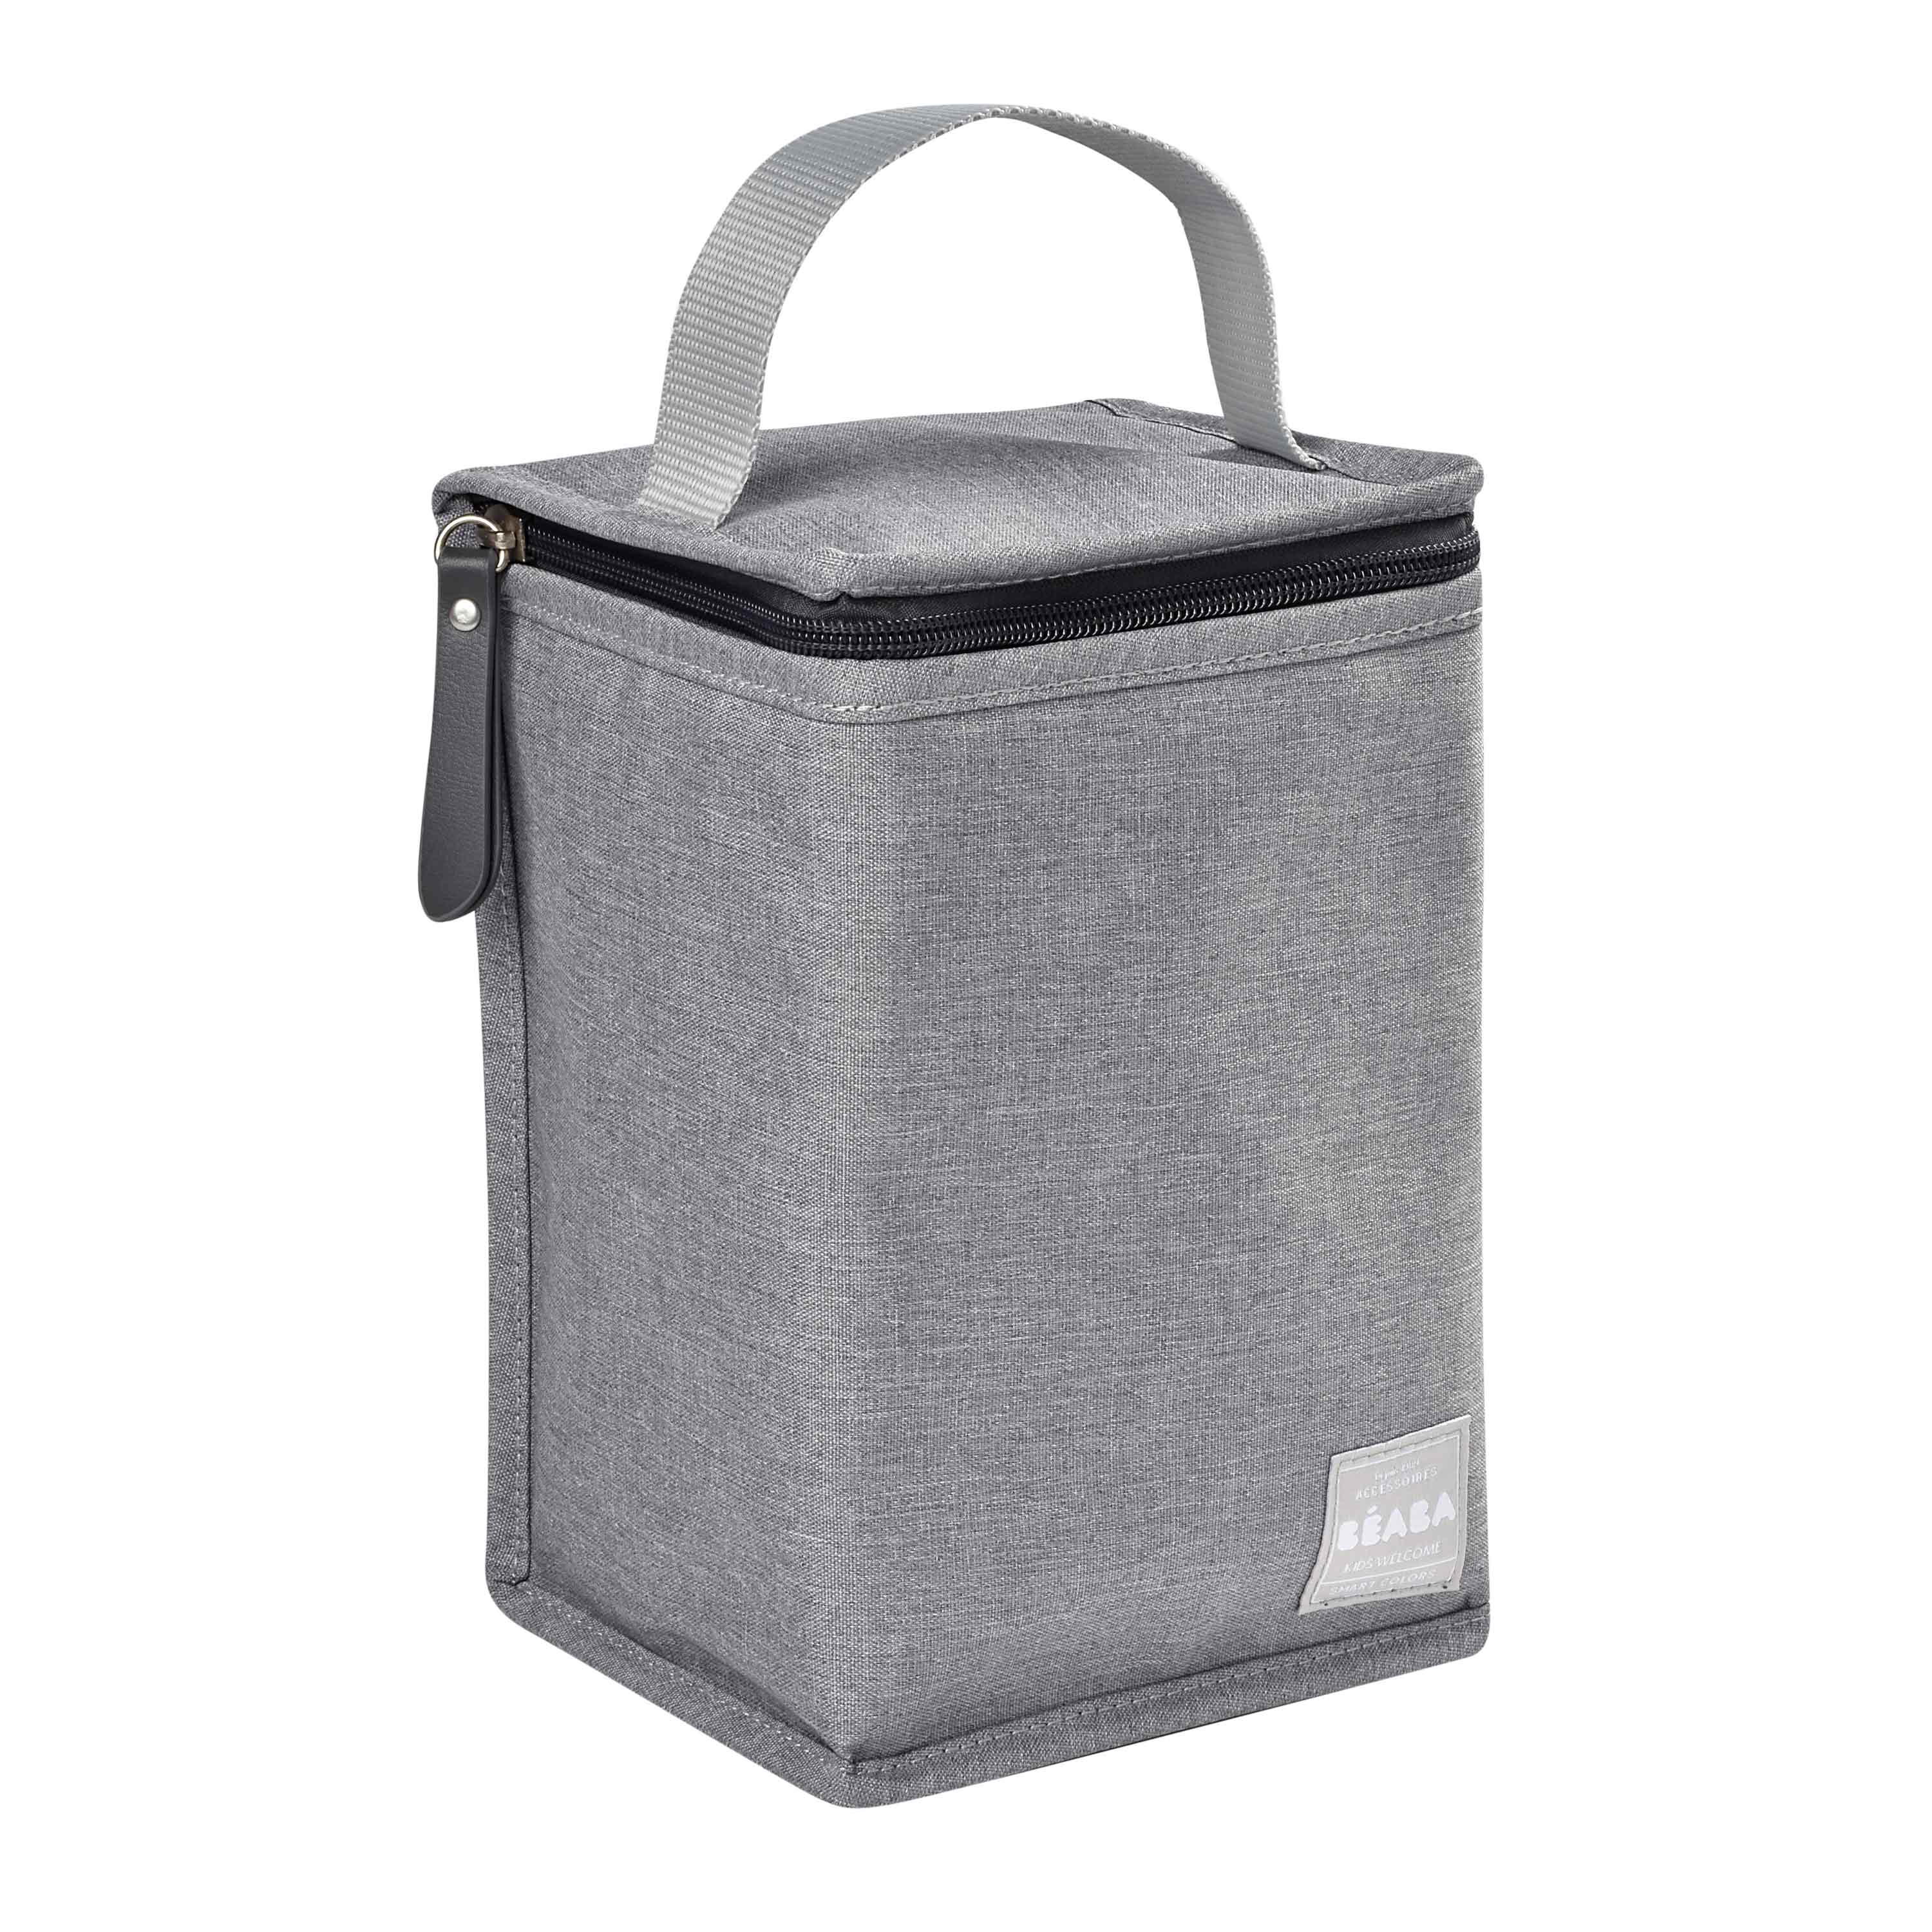 Sac lunch bag isotherme & Bouteille isotherme Black - Label'tour